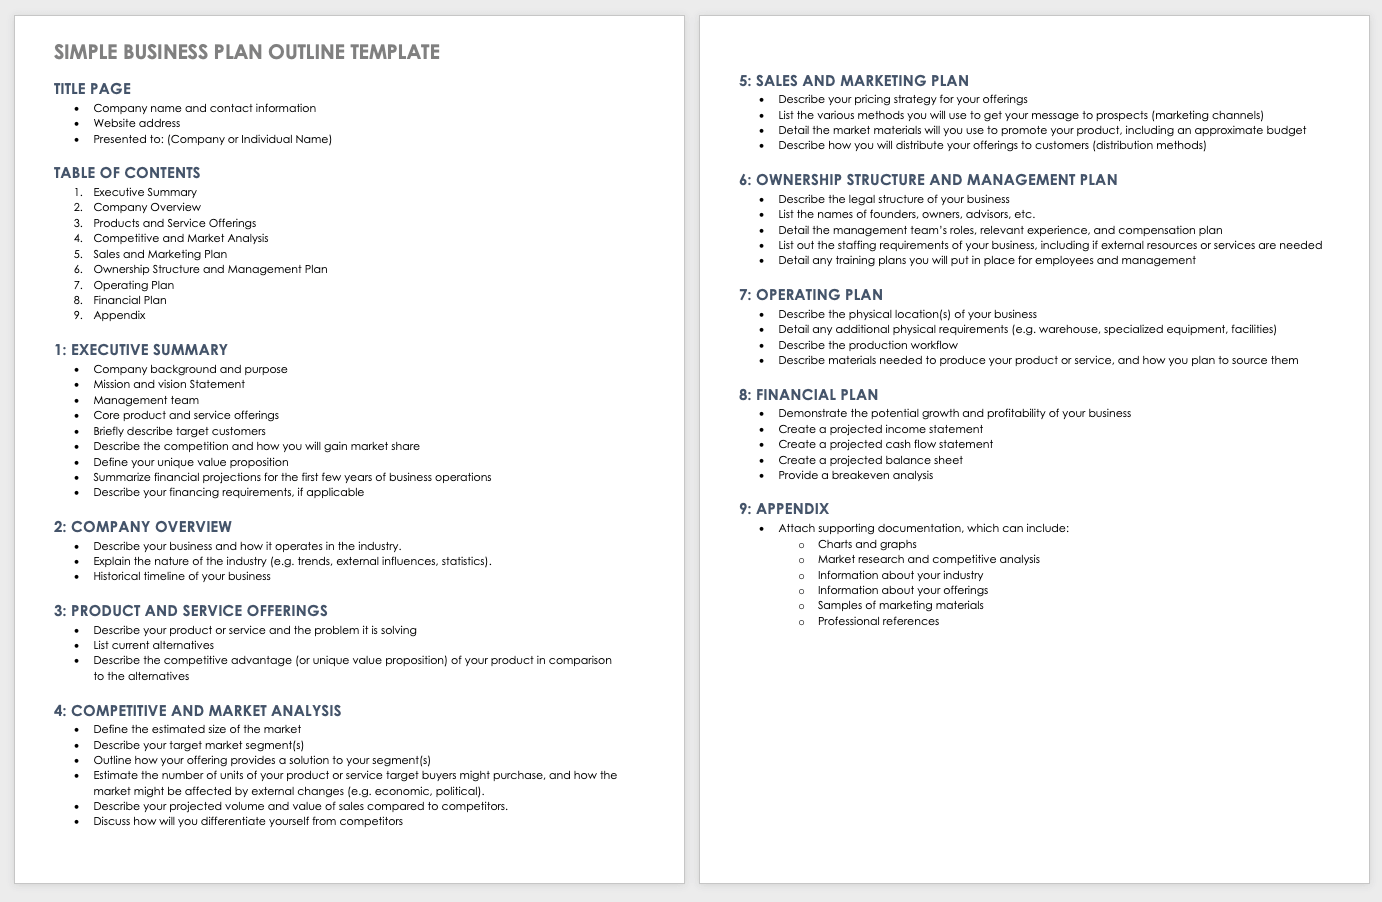 Simple Business Plan Outline Template